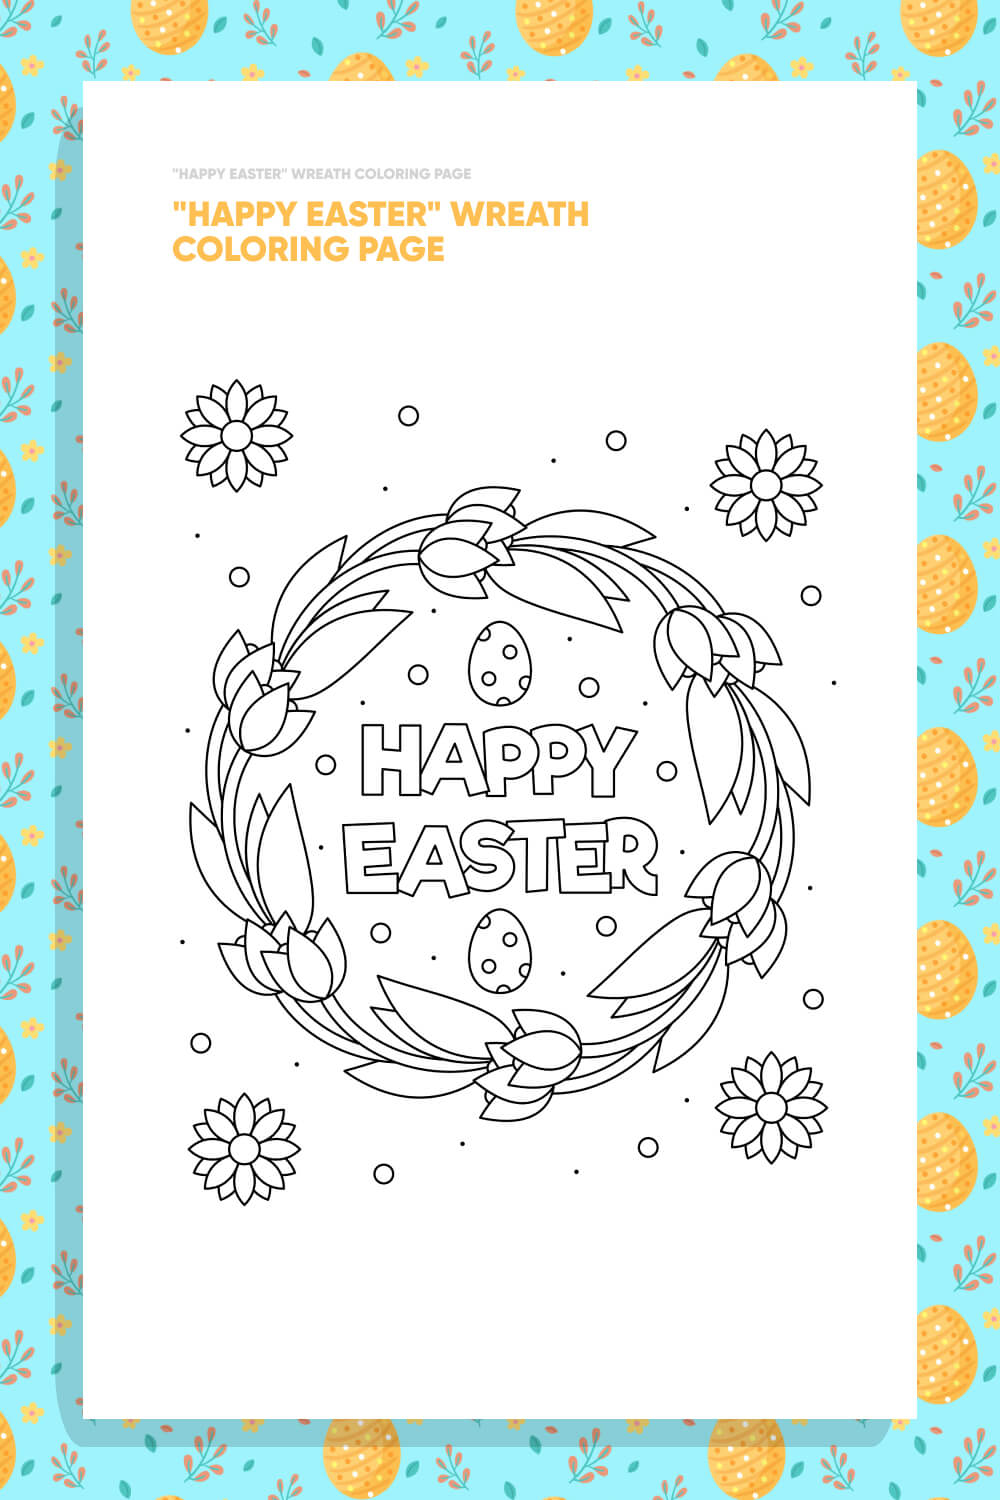 "Happy Easter" Wreath Coloring Page pinterest.